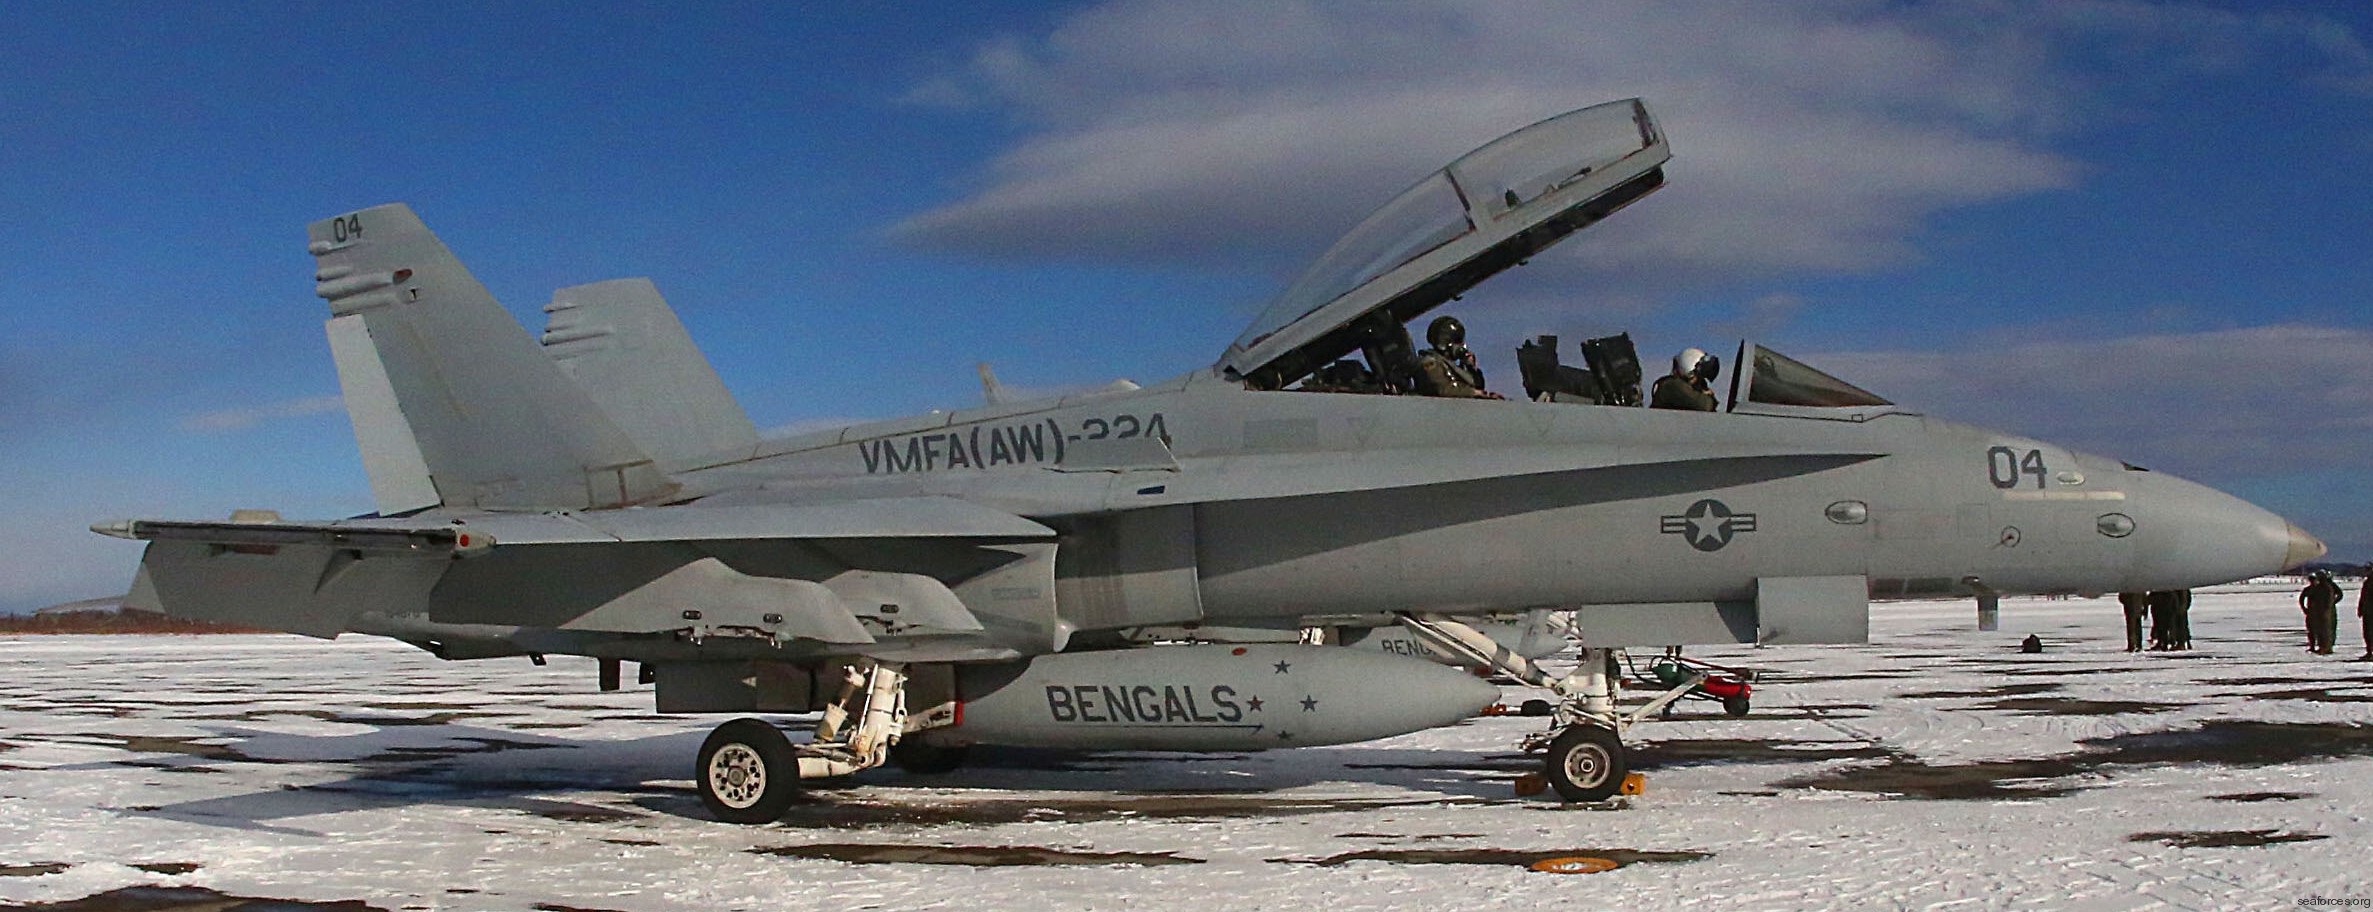 vmfa(aw)-224 bengals marine fighter attack squadron usmc f/a-18d hornet 35